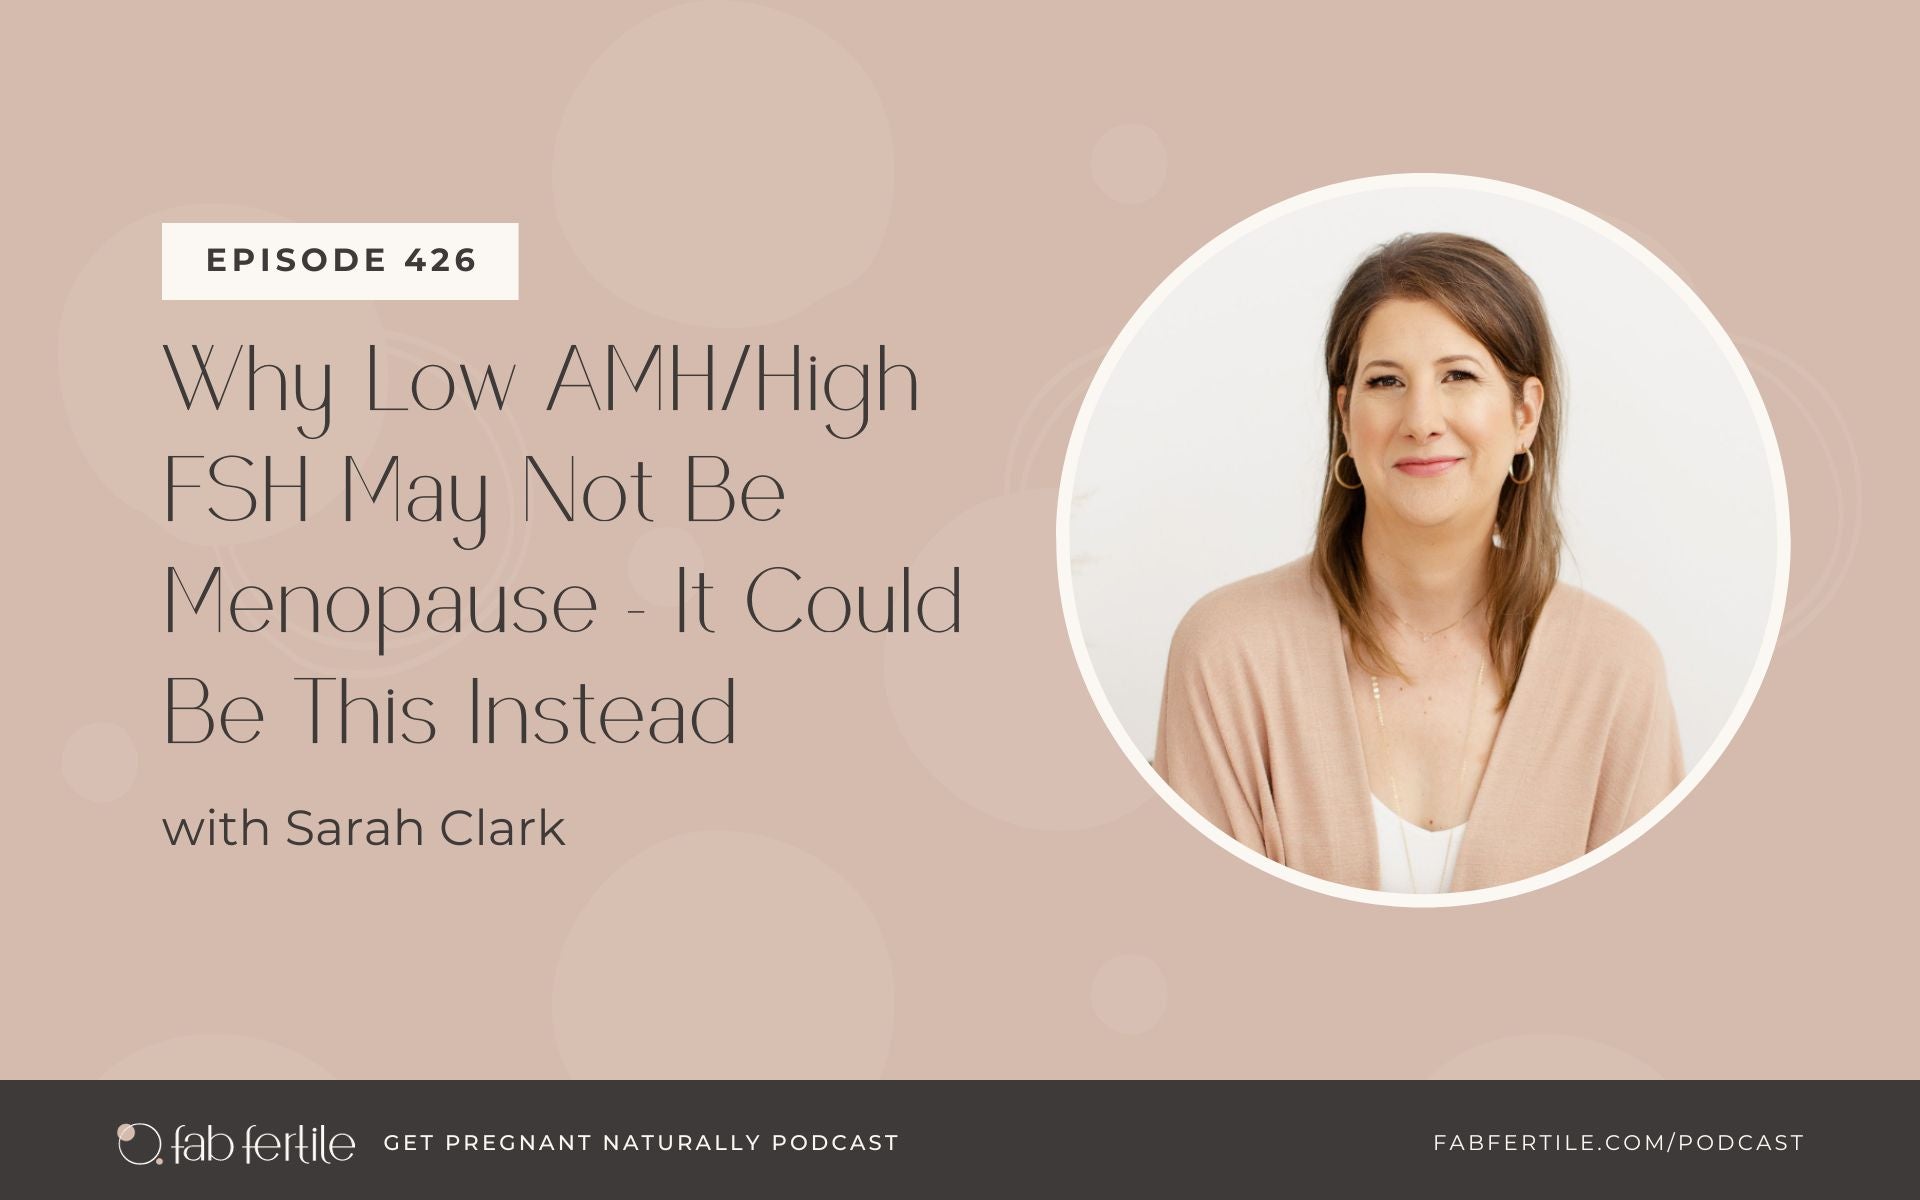 Why Low AMH/High FSH May Not Be Menopause - It Could Be This Instead